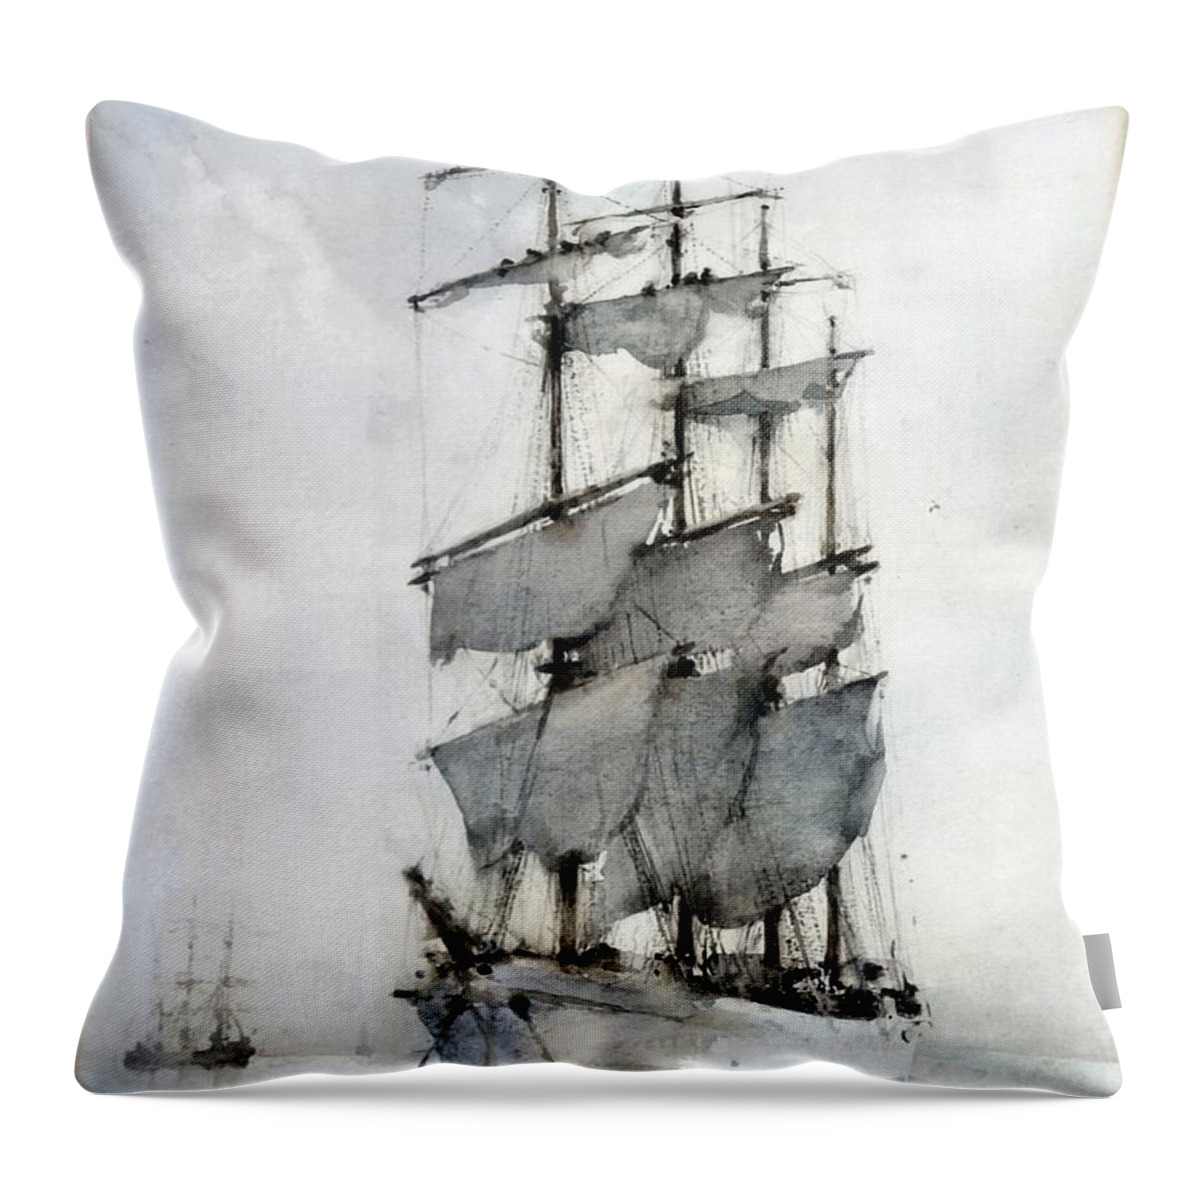 Henry Scott Tuke. Four Masted Barque Throw Pillow featuring the painting Four Masted Barque by Henry Scott Tuke